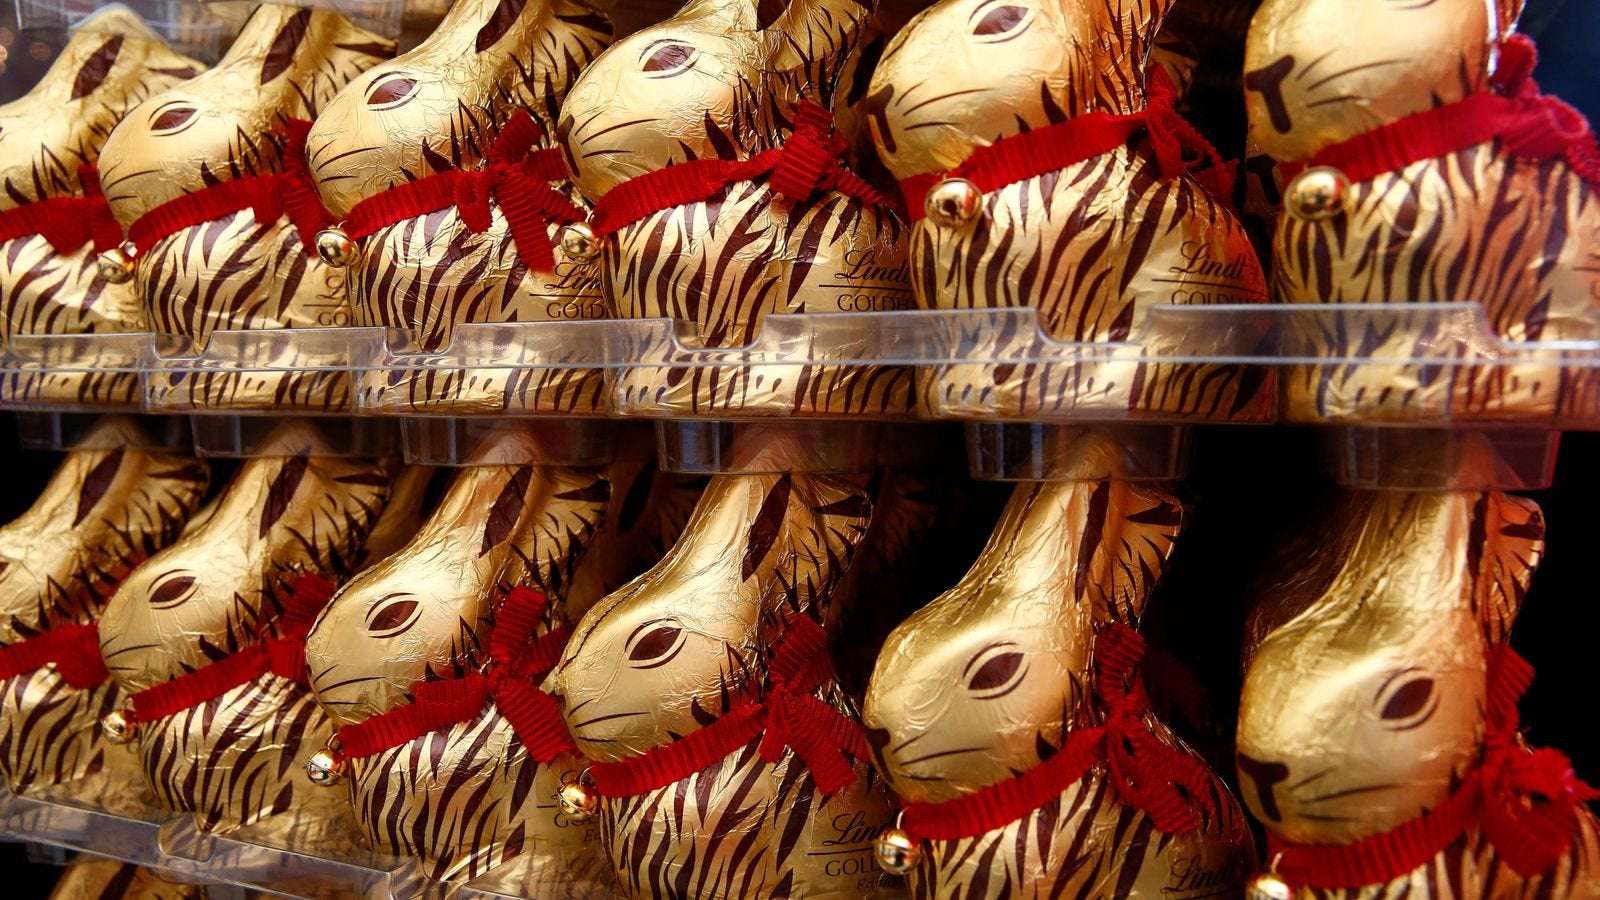 image for Lidl told to destroy gold chocolate bunnies after it loses copyright case with Lindt